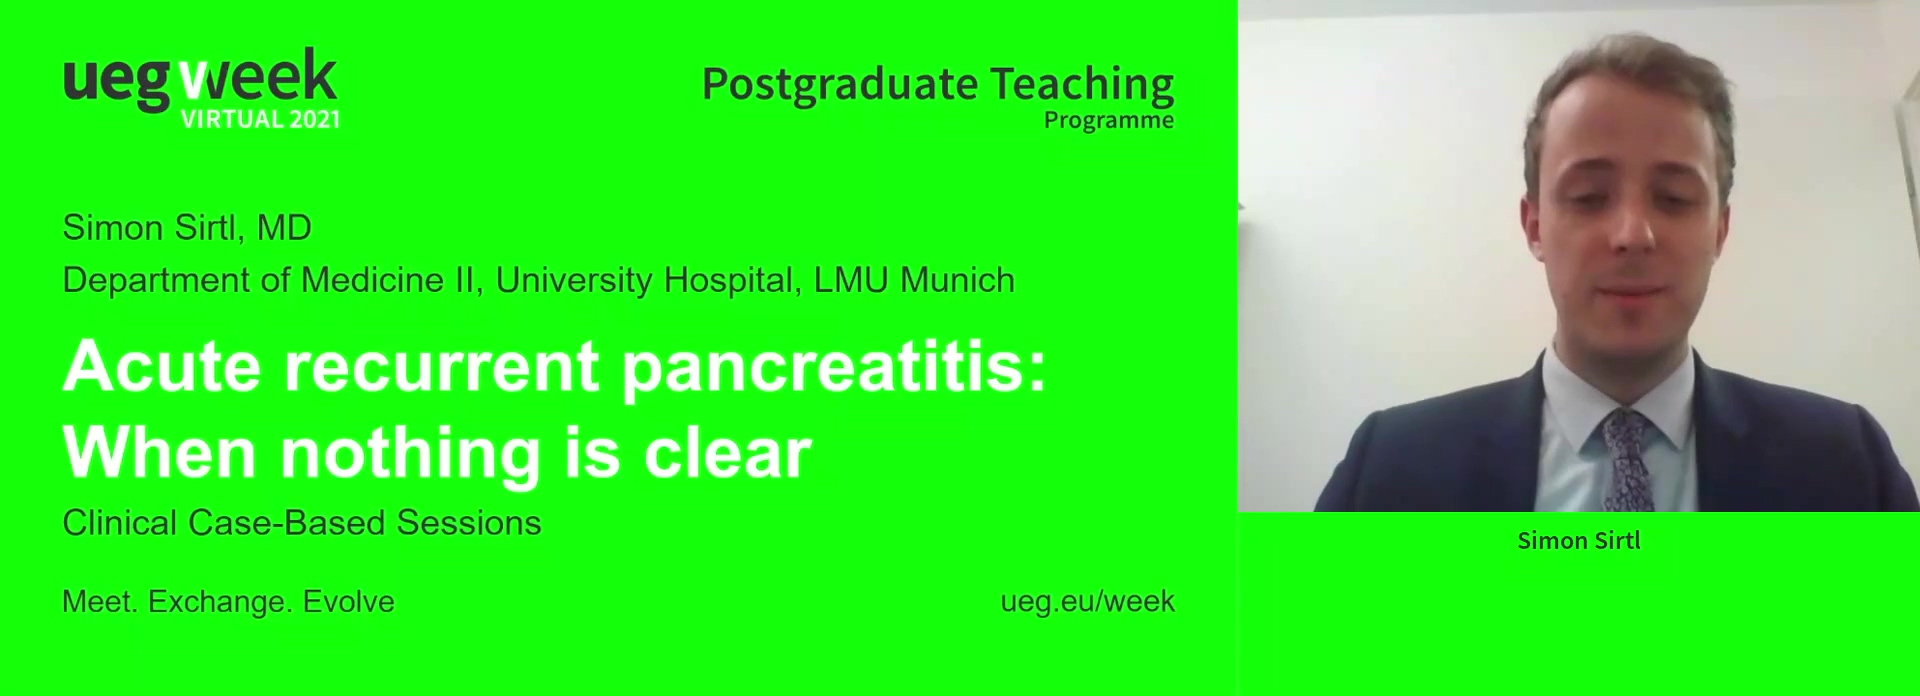 Acute recurrent pancreatitis: When nothing is clear